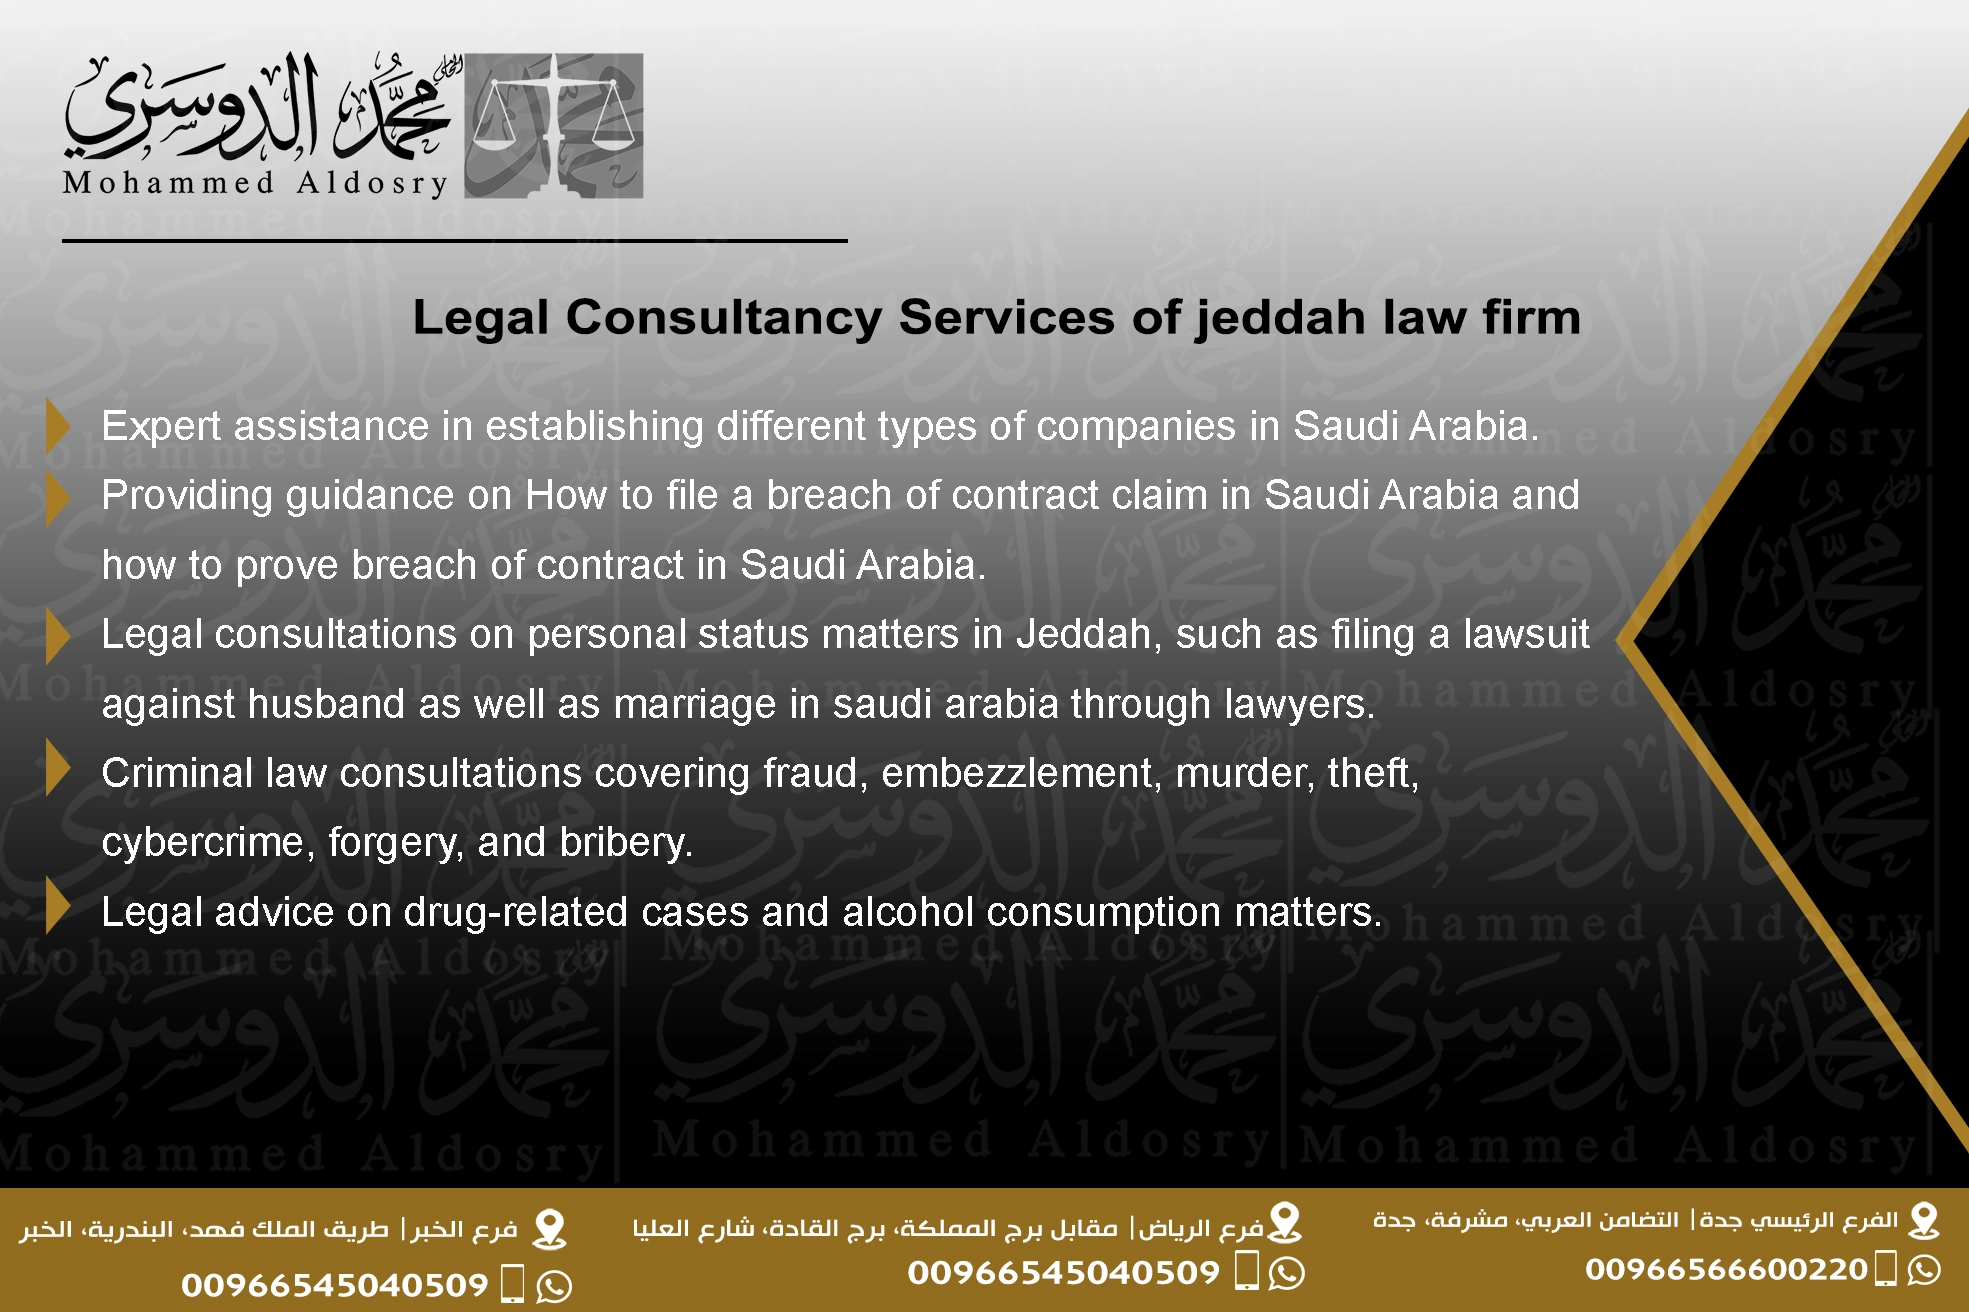 Legal Consultancy Services of jeddah law firm